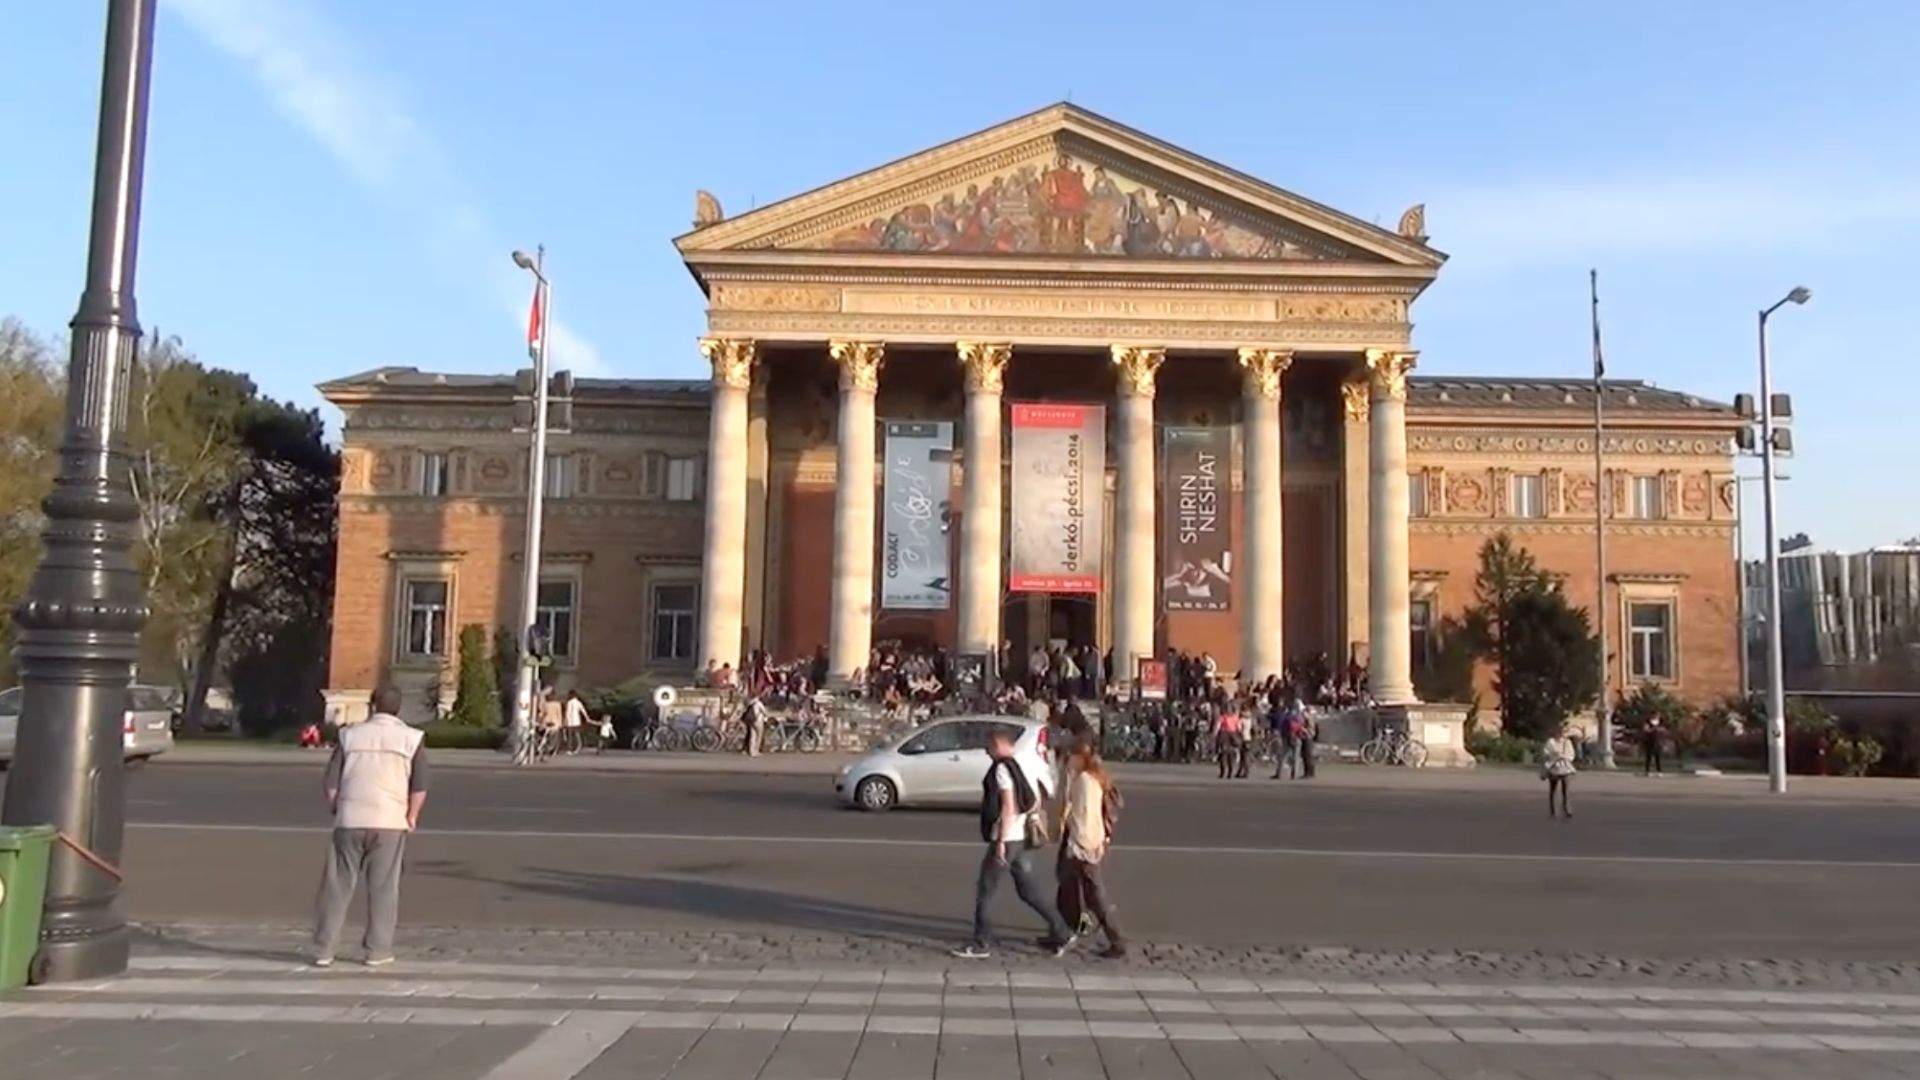 Front view of the Kunsthalle building in Budapest, Hungary, with people walking and gathering in front.